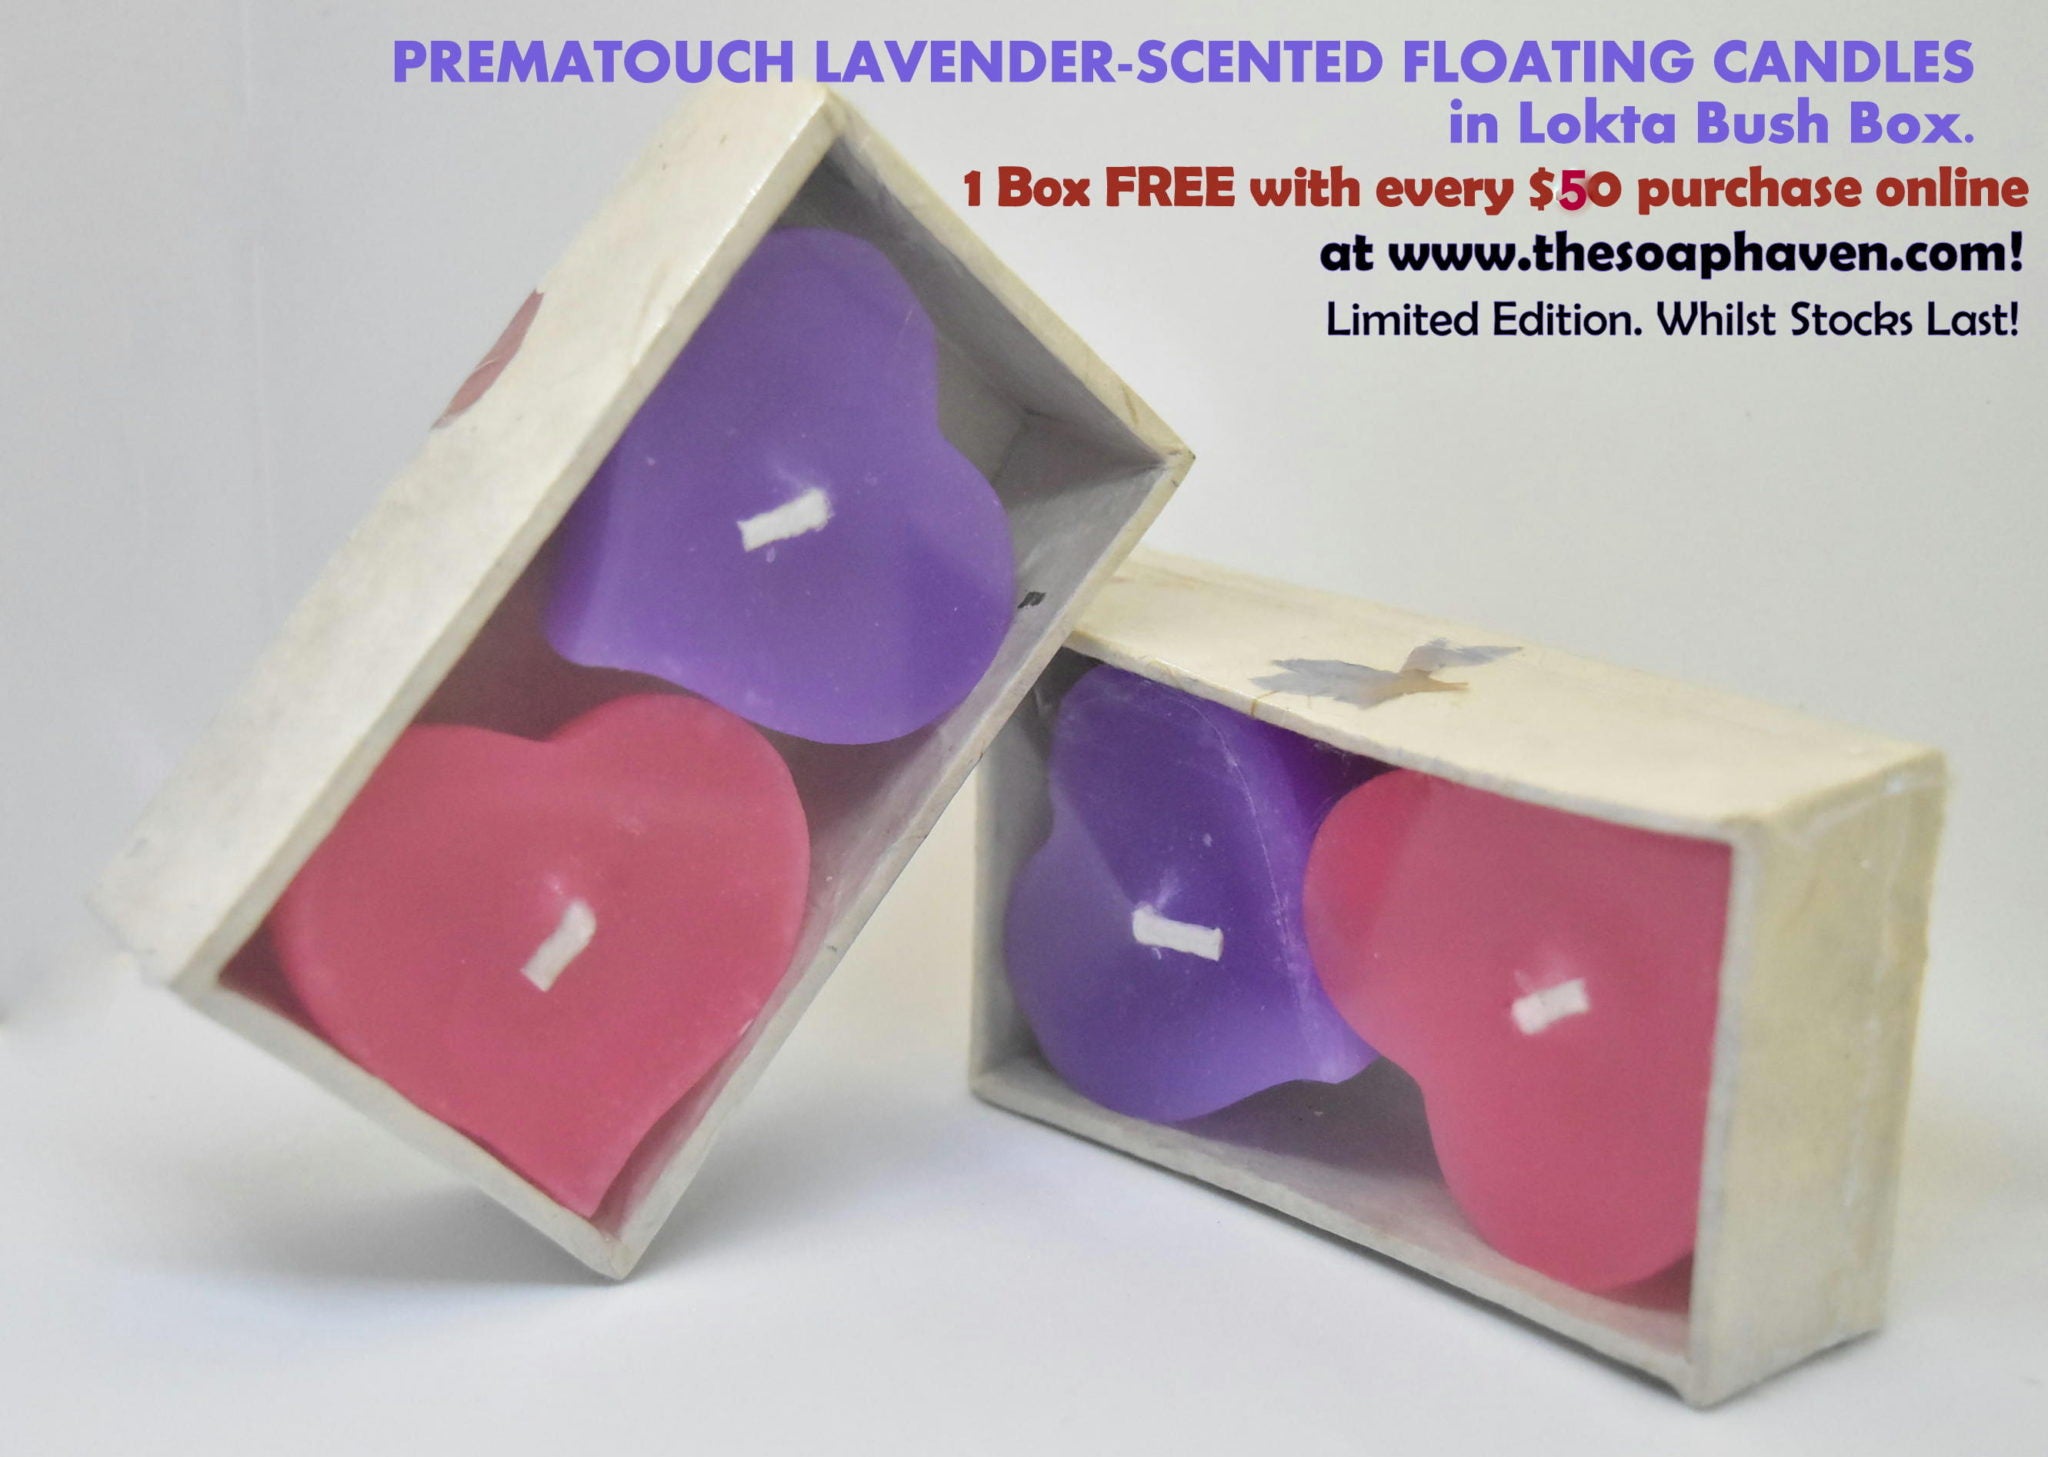 PremaTouch Lavender-scented floating 2 hearts candles FREE with every $50 purchase online